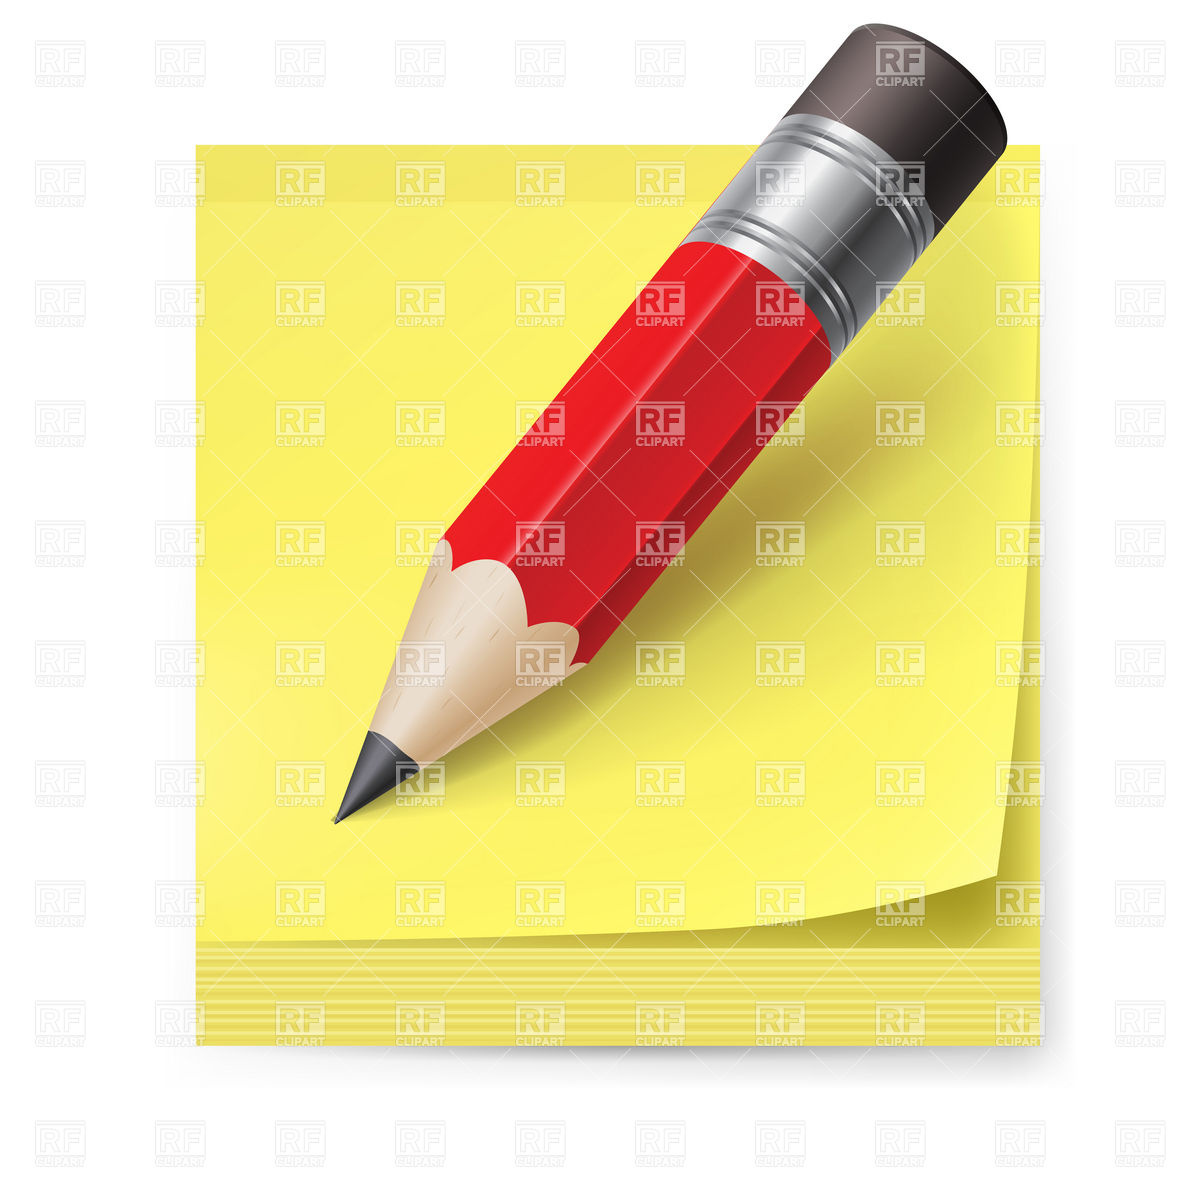 Download Vector About Vector Pencils With Eraser Item 10 At Vector